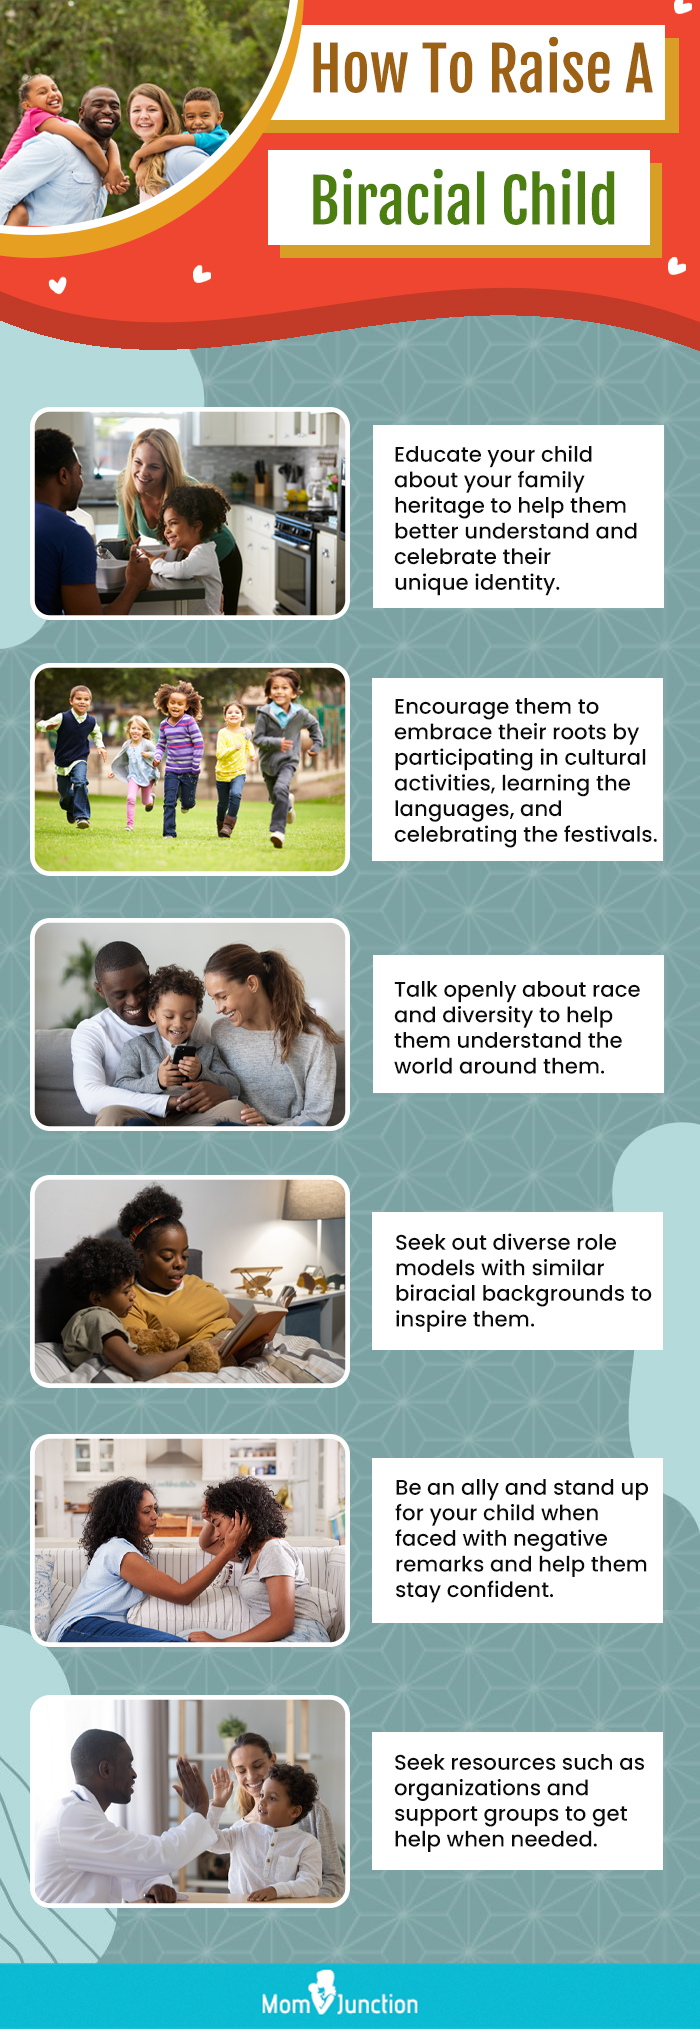 how to raise a biracial child (infographic)